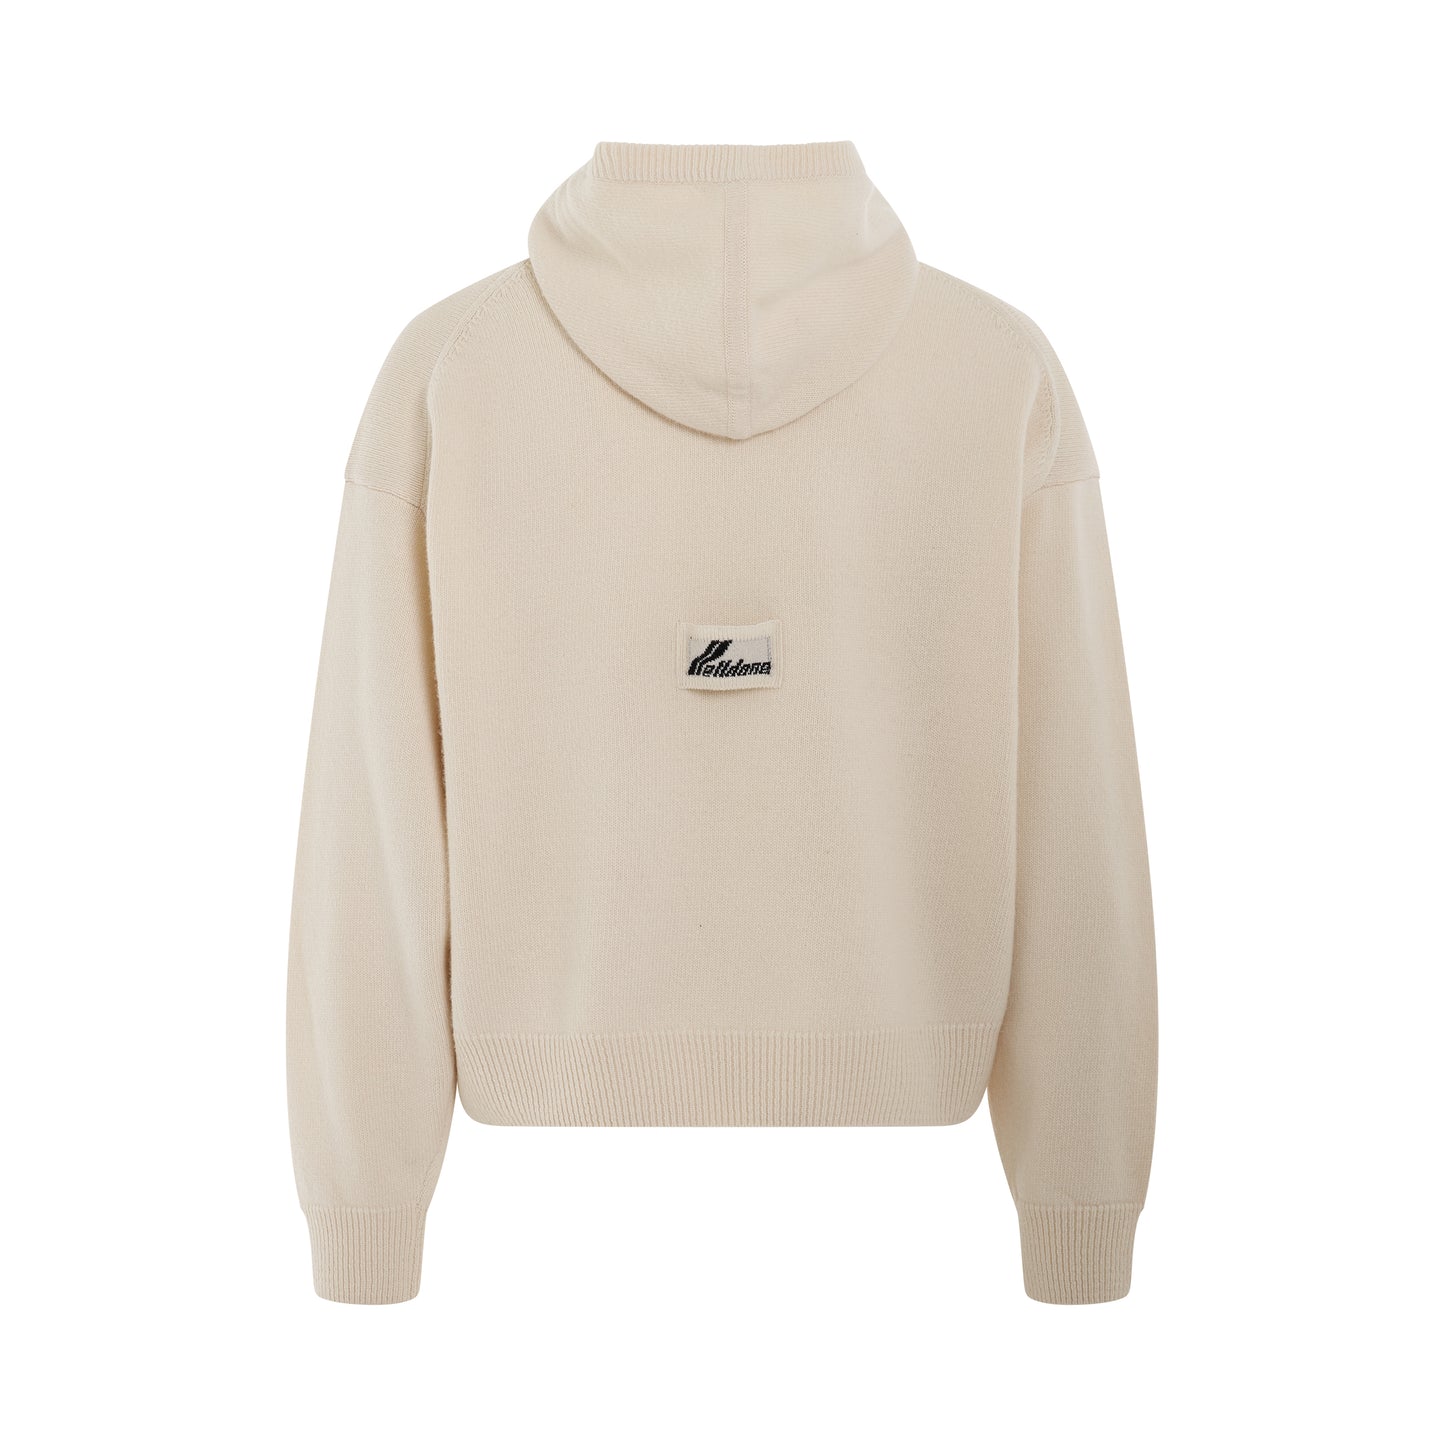 Oversized Basic Knit Hoodie in Ivory